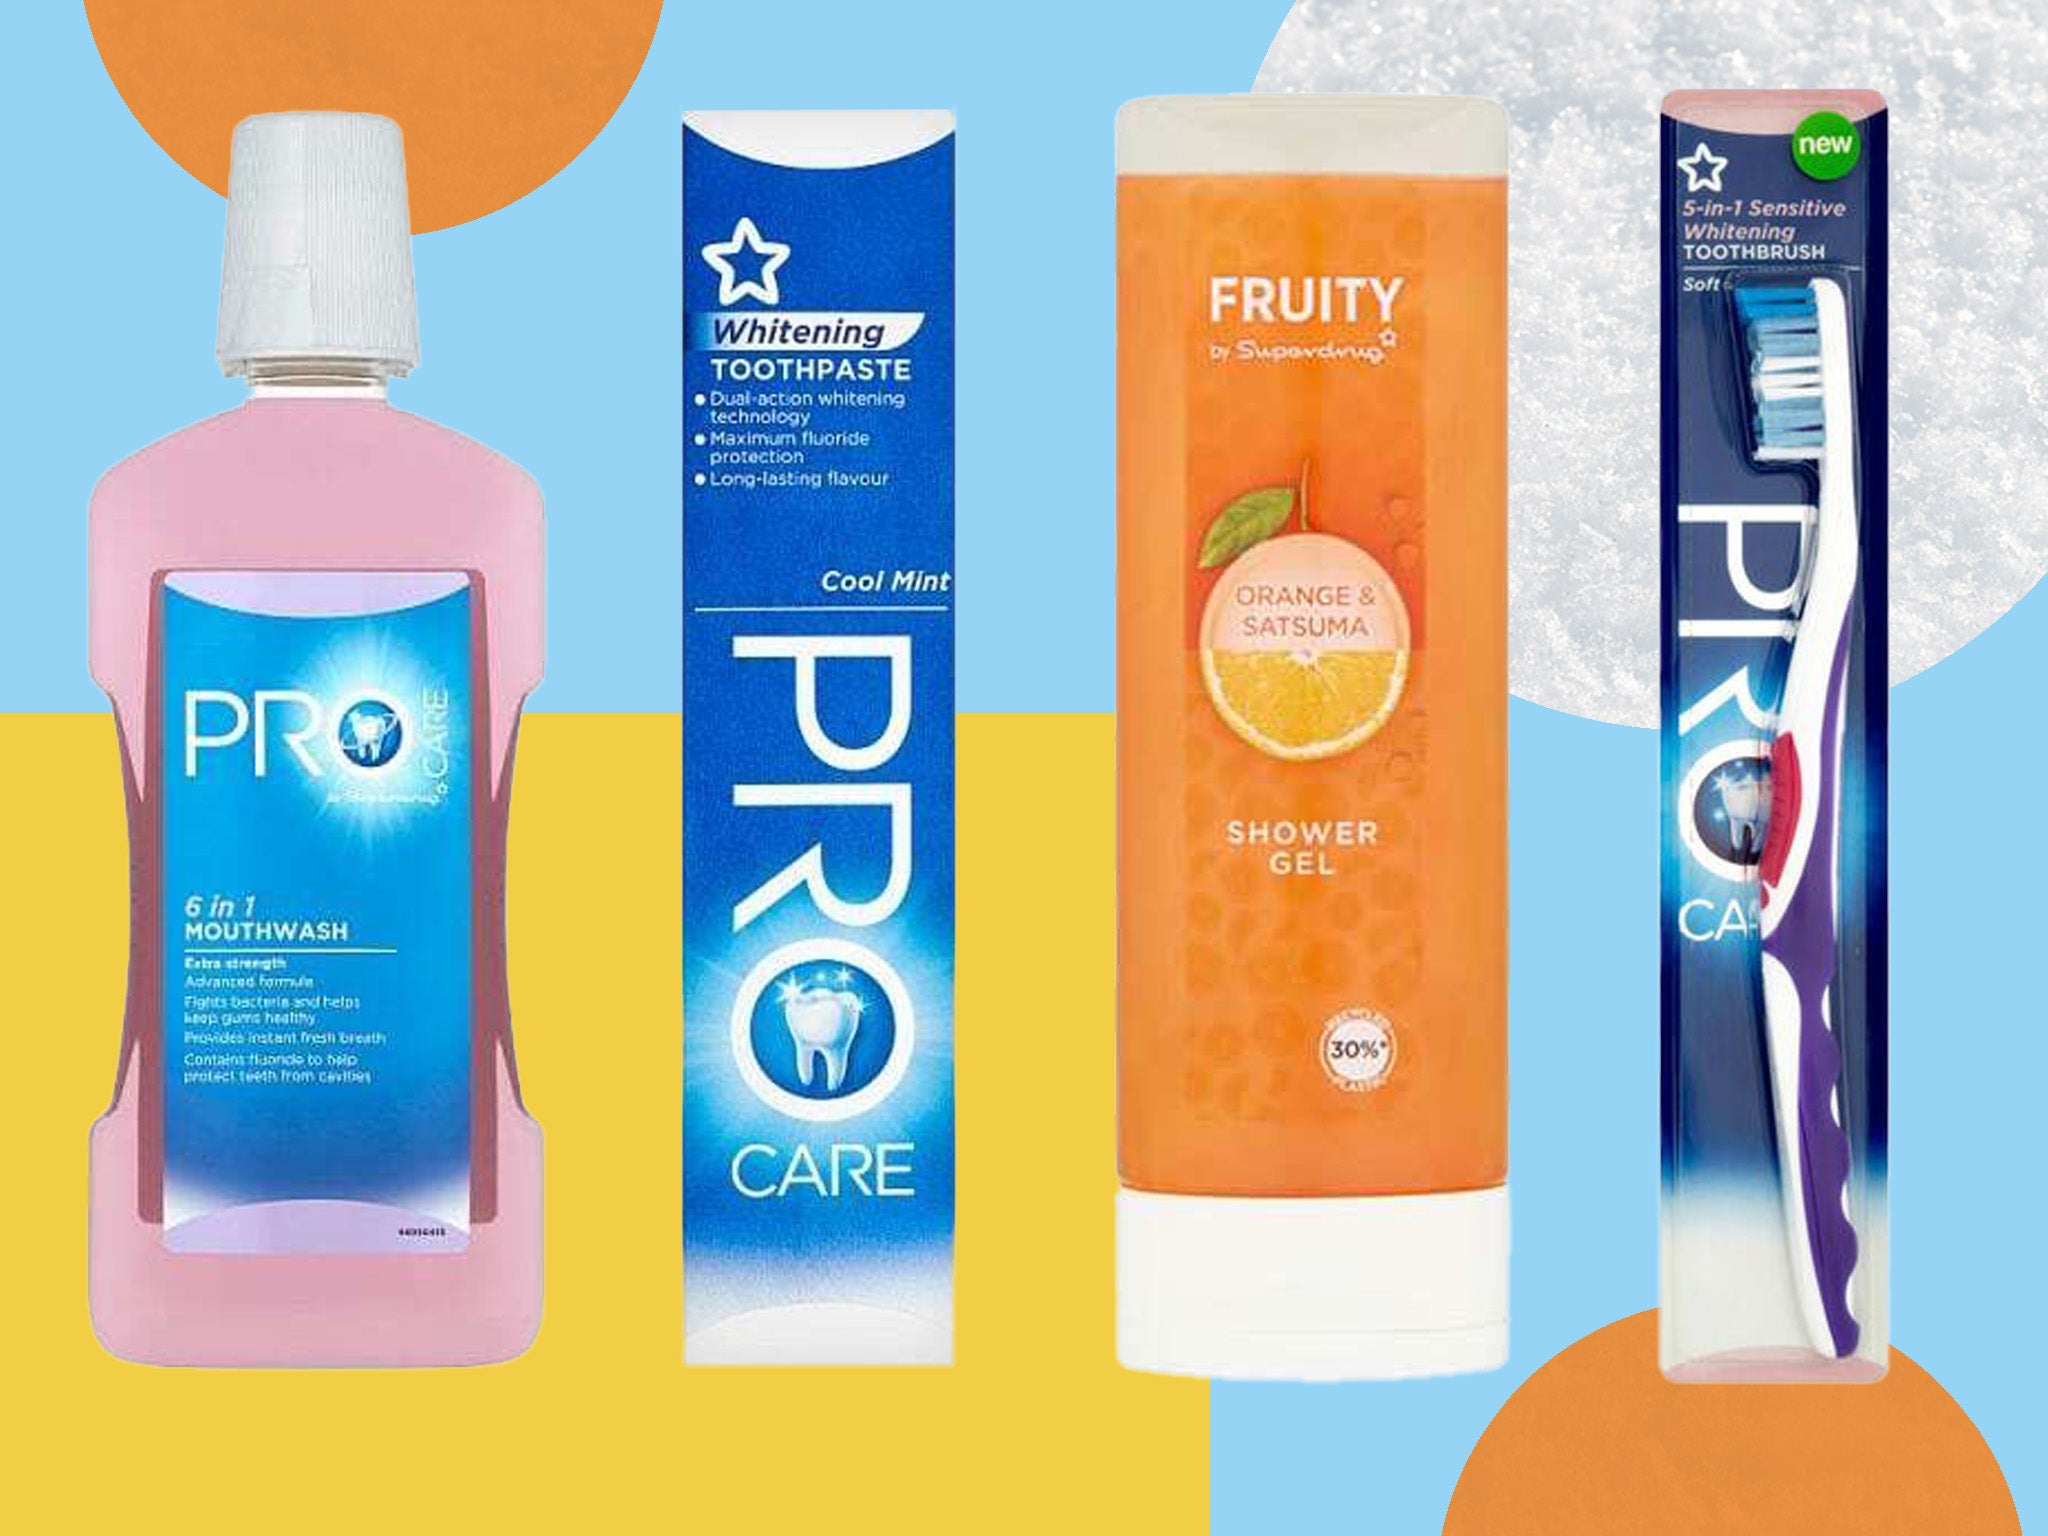 Superdrug’s shop smart campaign sees a one-year price freeze across a huge 130 everyday essentials